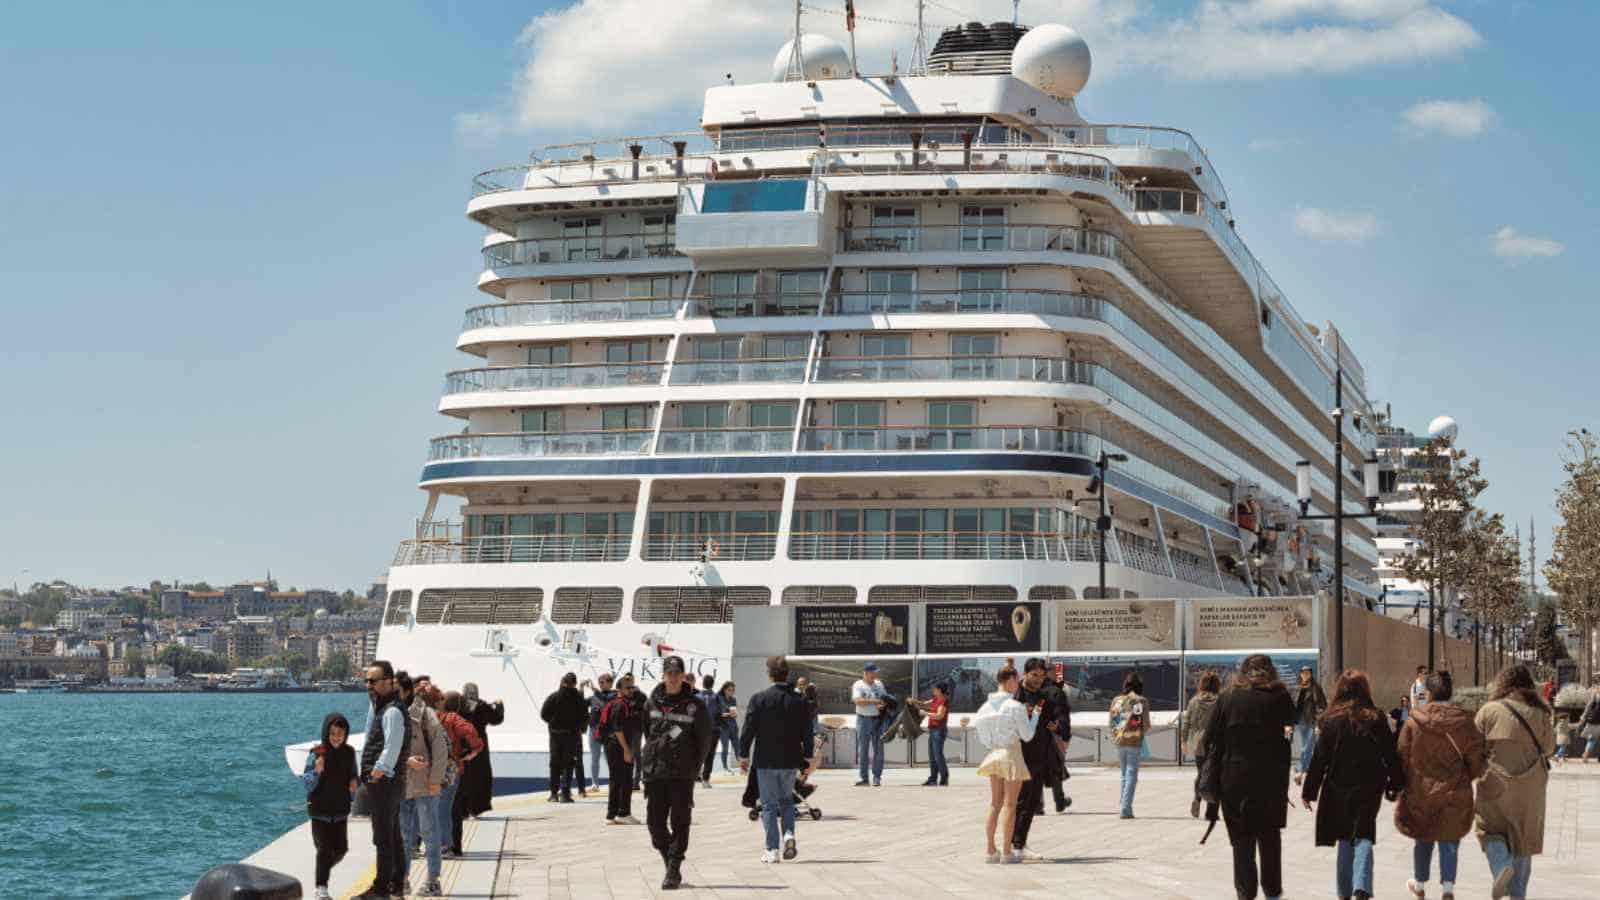 <p>Through comprehensive passenger polls and research, we are sharing the most highly rated passenger ships. We will look at the highest-rated cruise ships voted by guests.</p><p><a href="https://frenzhub.com/highly-rated-cruise-ships/">Most Highly Rated Cruise Ships Voted by Passengers</a></p>